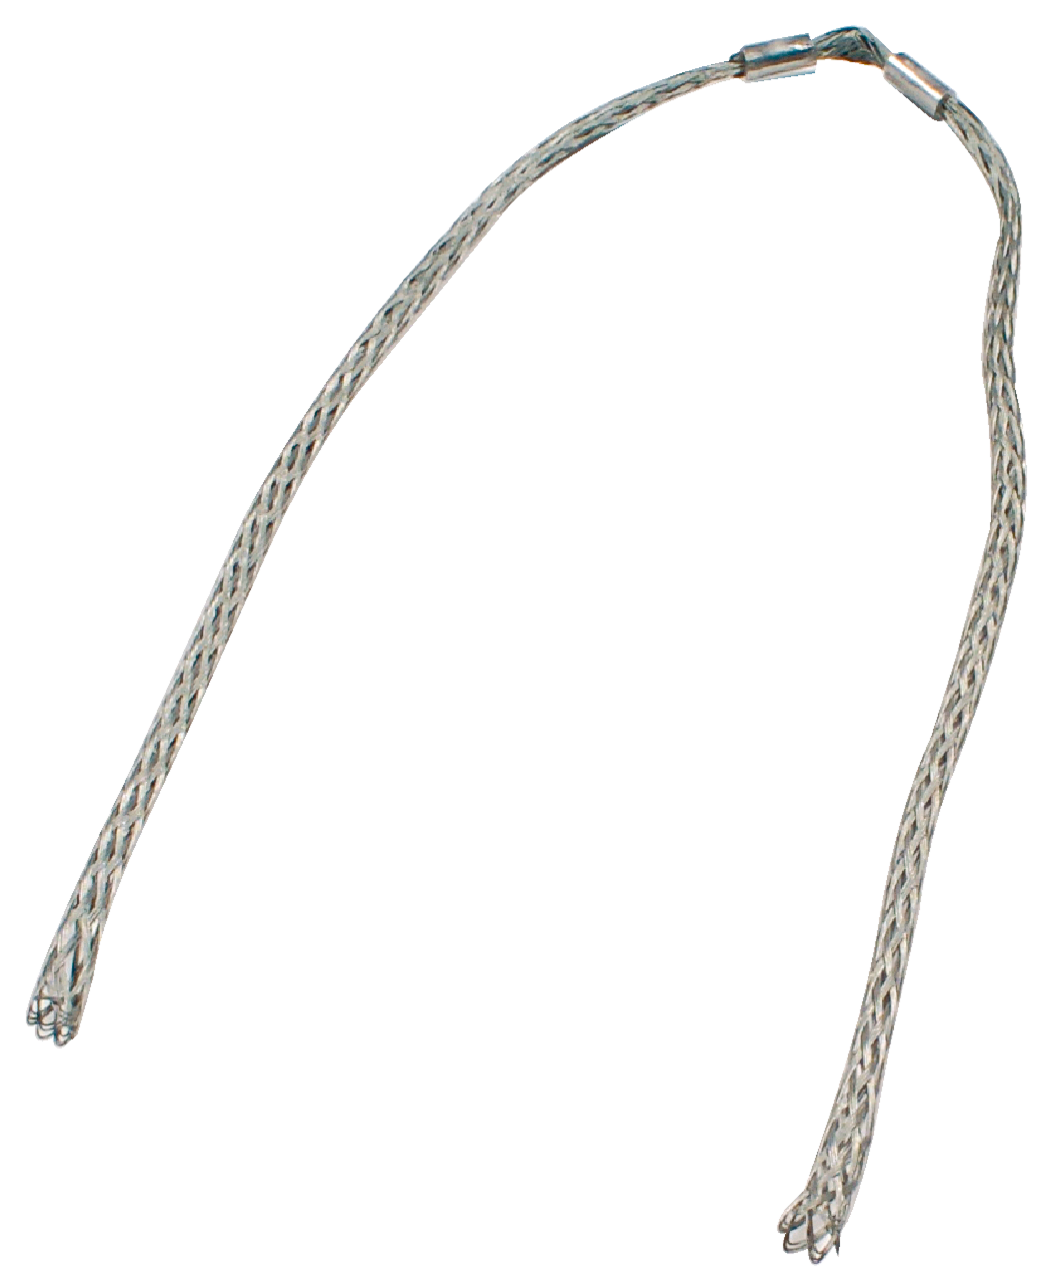 Cable Sock type 504